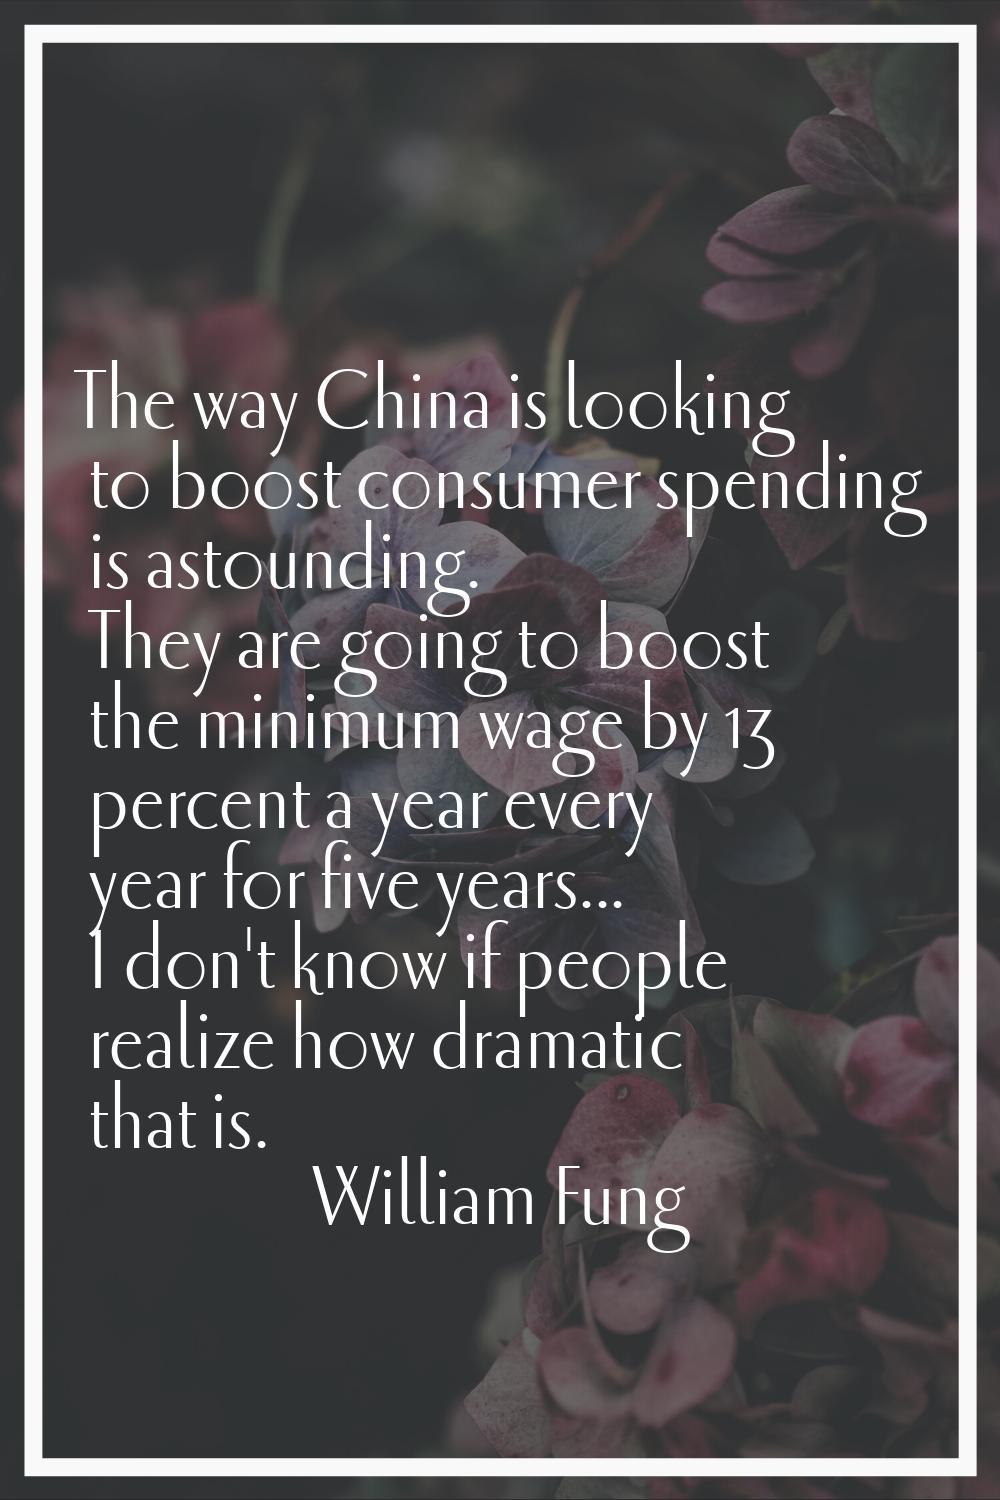 The way China is looking to boost consumer spending is astounding. They are going to boost the mini